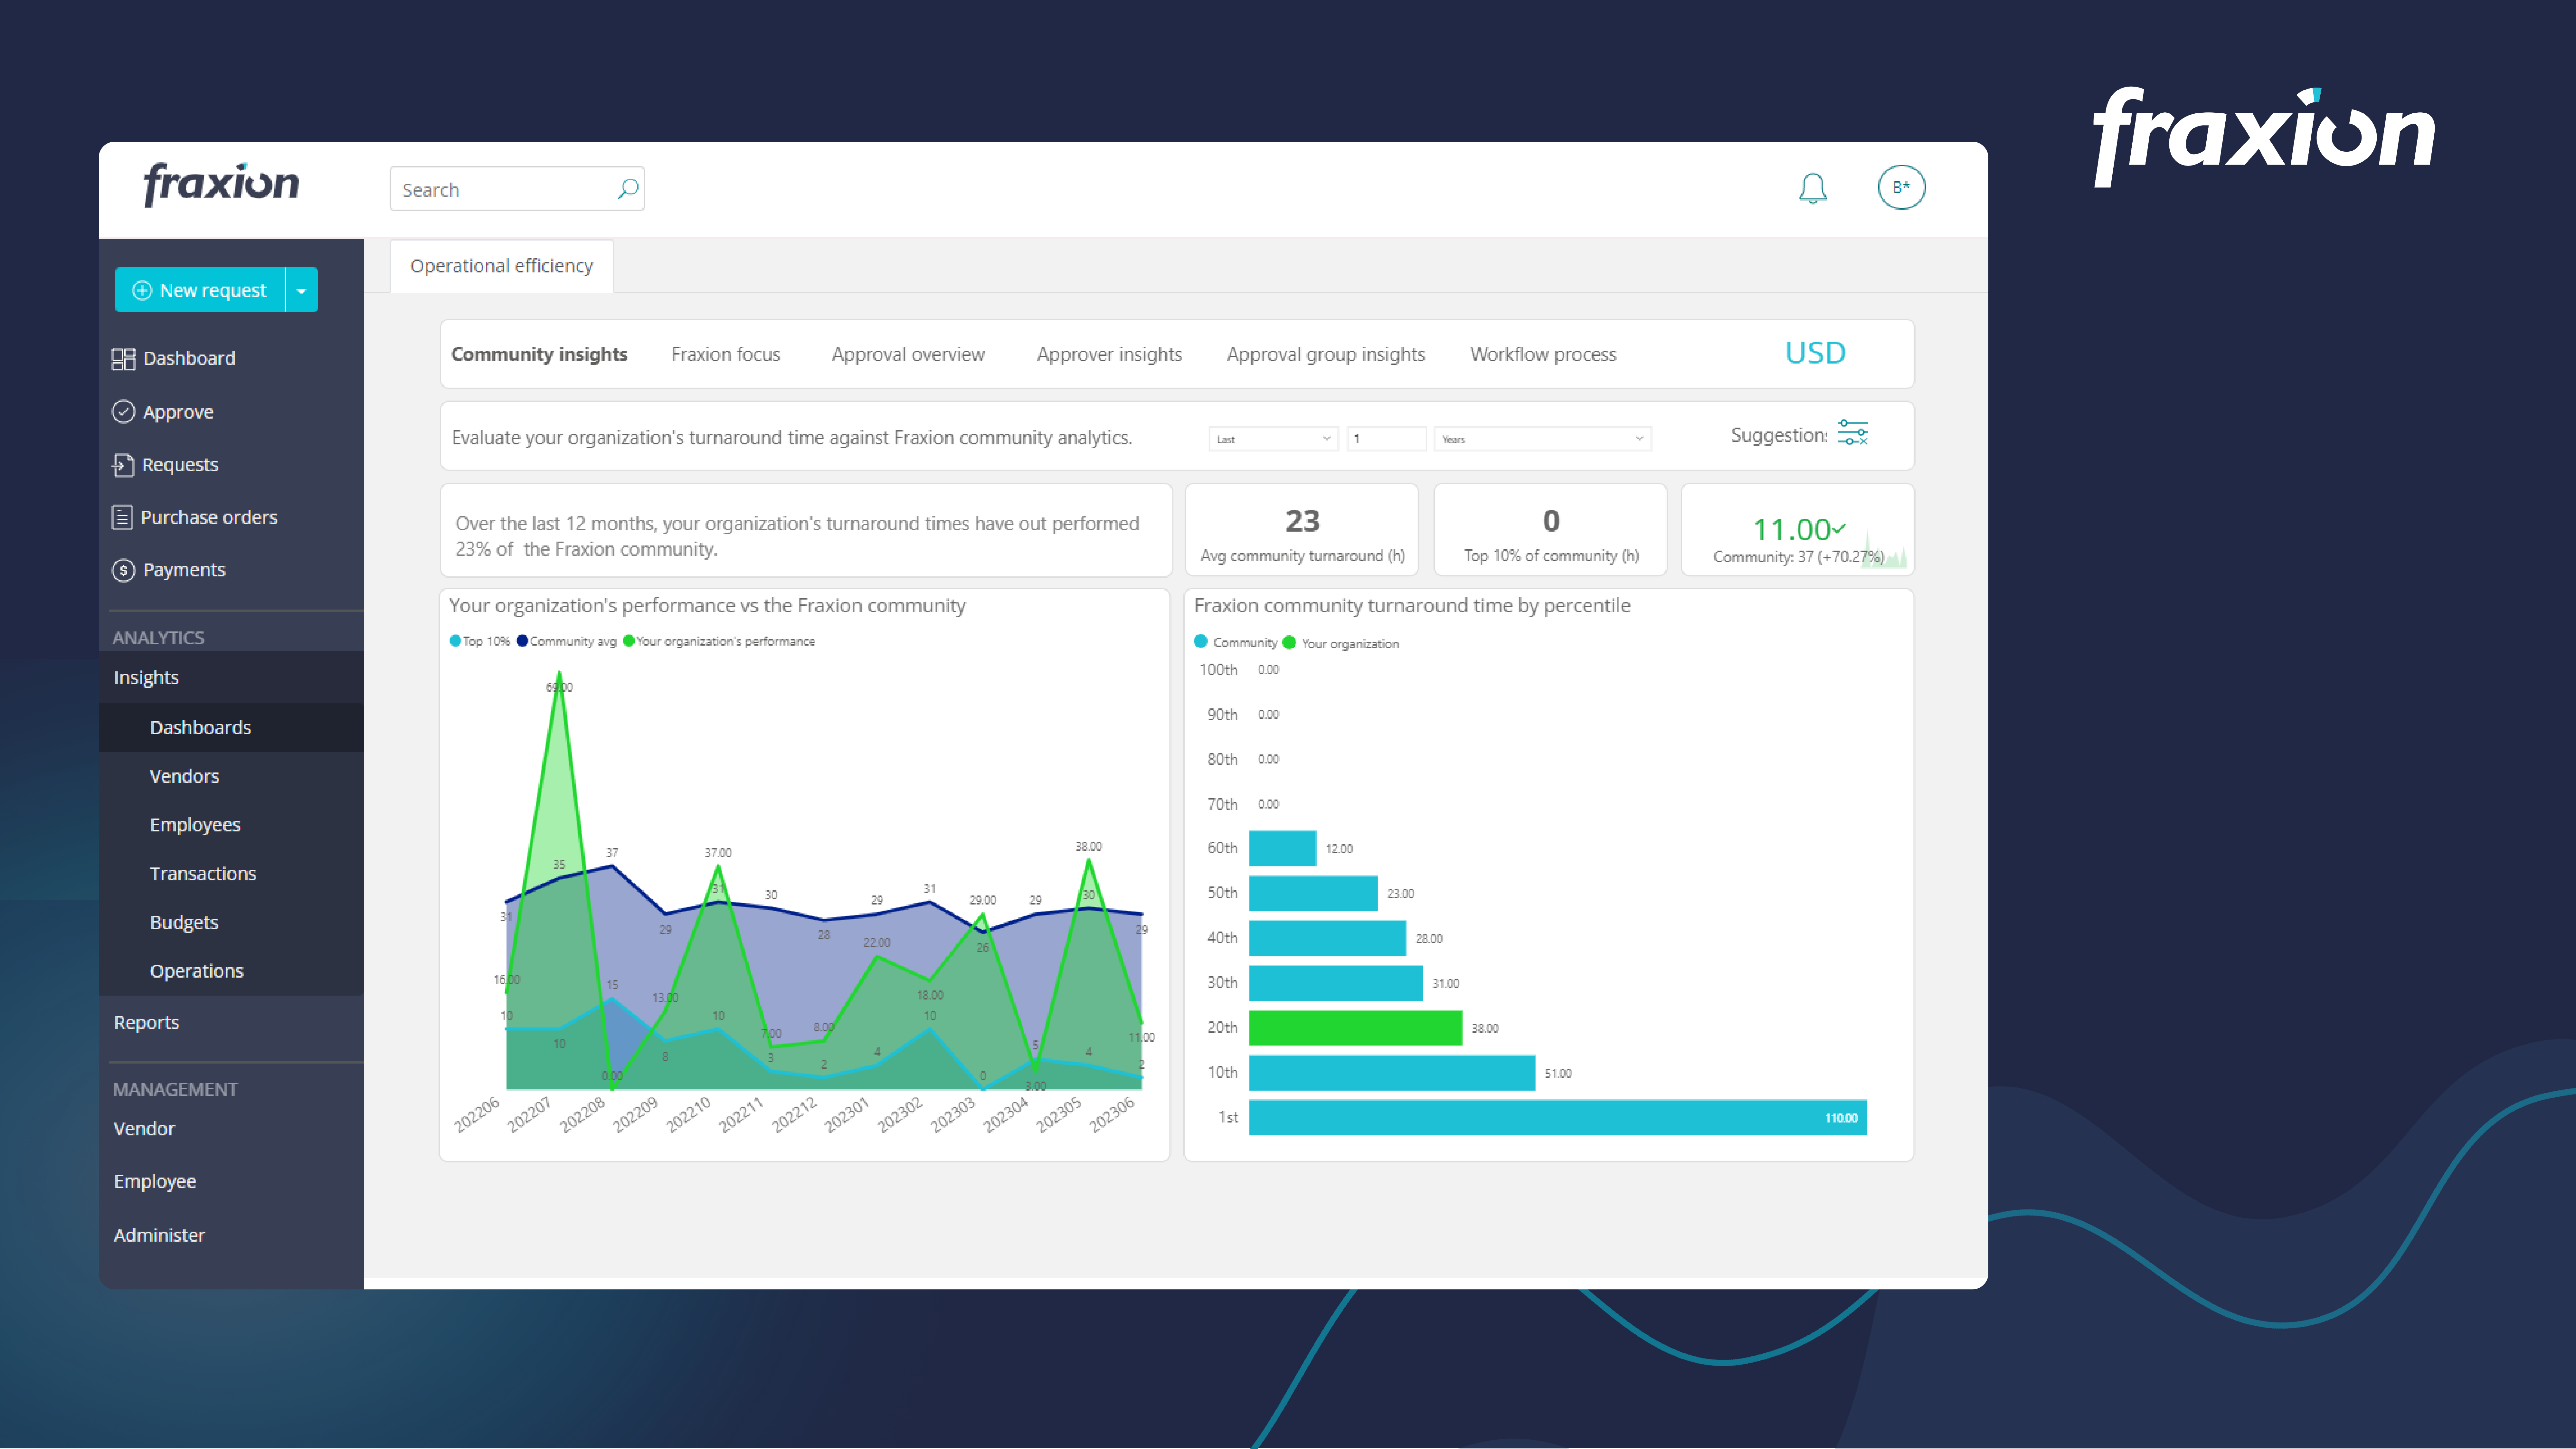 Embedded spend analytics, community insights, and reporting power